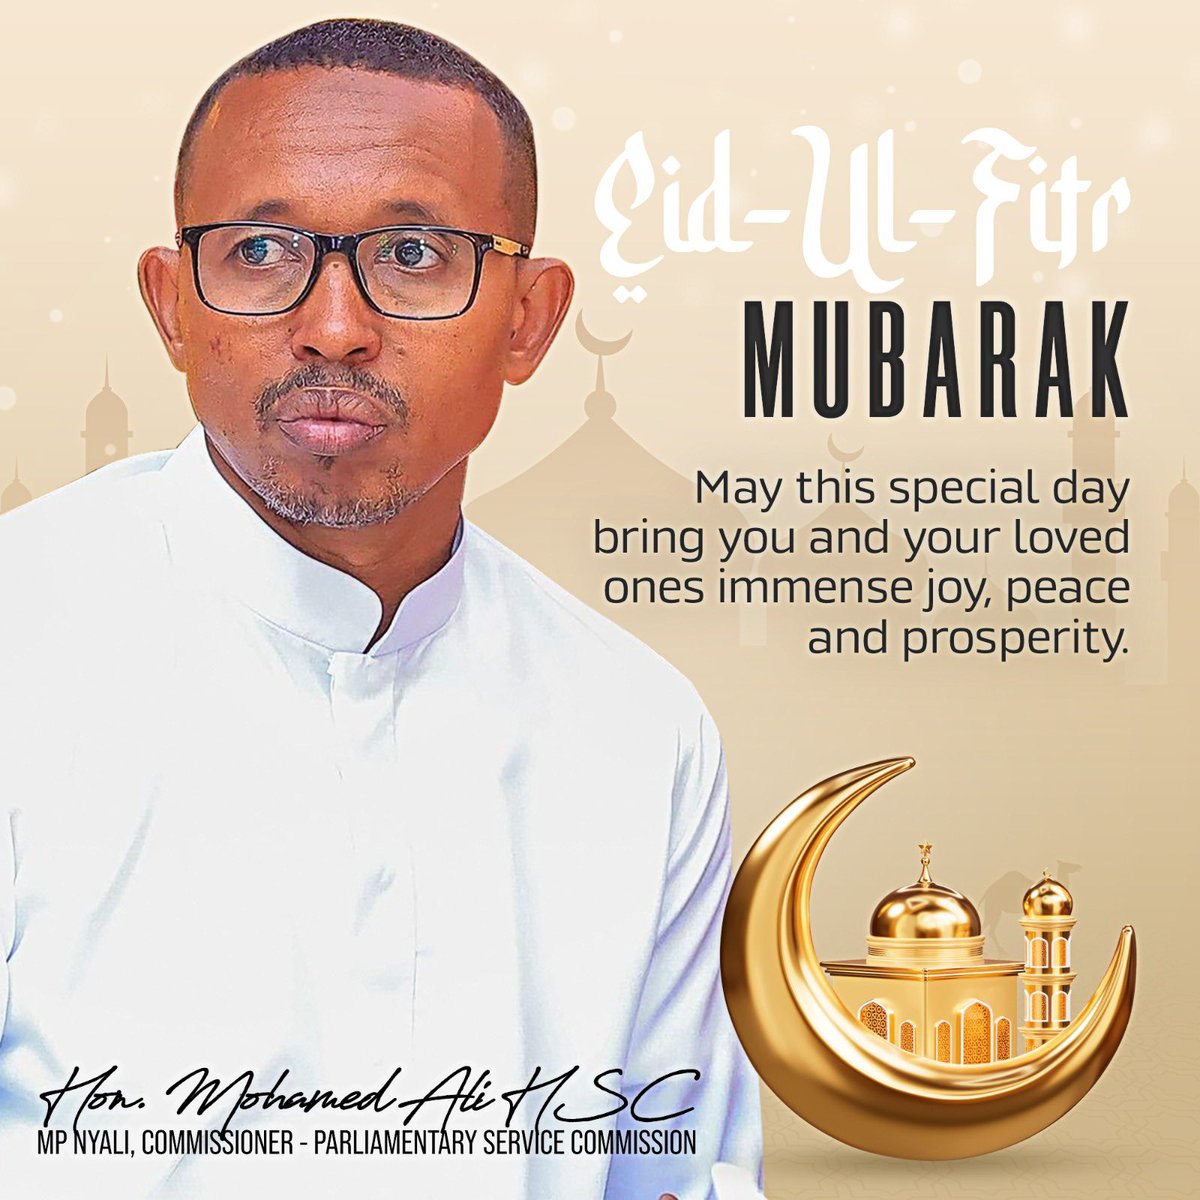 May this Eid ul-Fitr bring you joy, prosperity, and countless blessings. As we celebrate, let's cherish the bonds that unite us, spread love, and foster understanding. Wishing you a beautiful Eid filled with happiness and peace. Eid Mubarak!